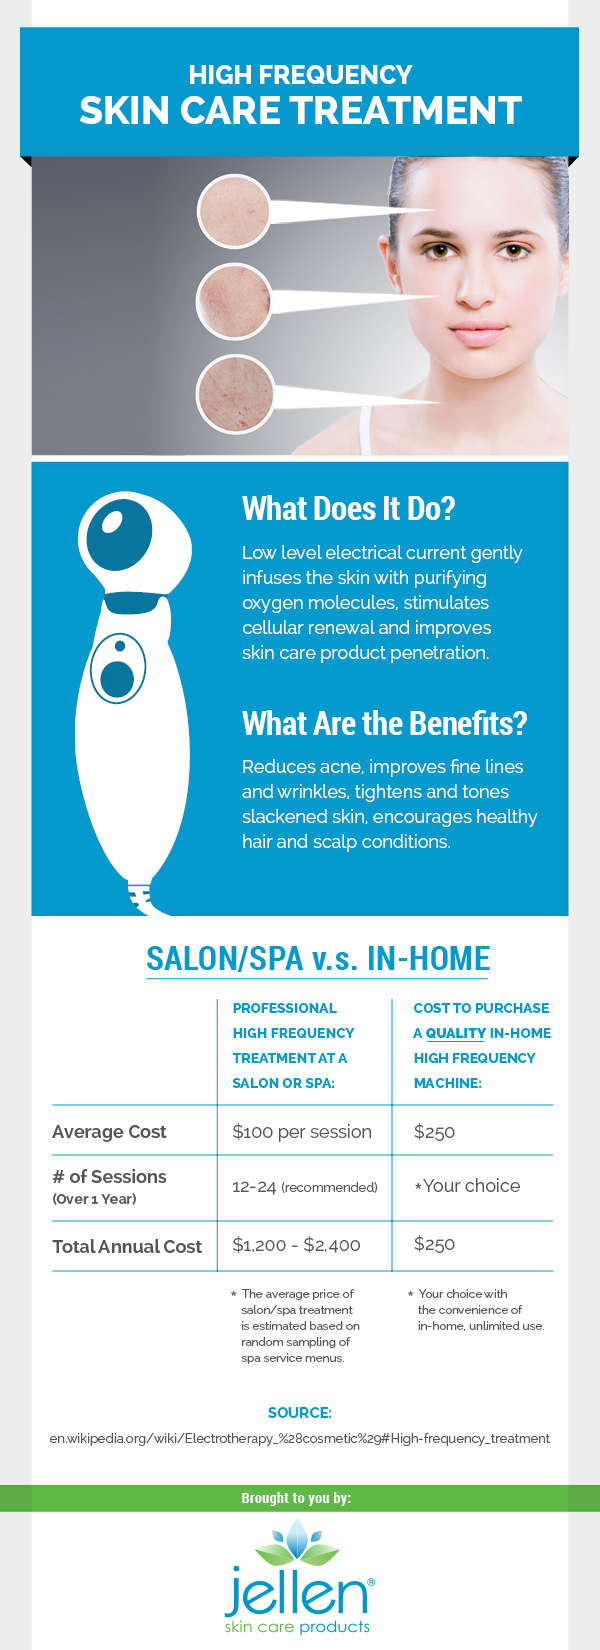 High Frequency Skin Care Treatment | Visual.ly